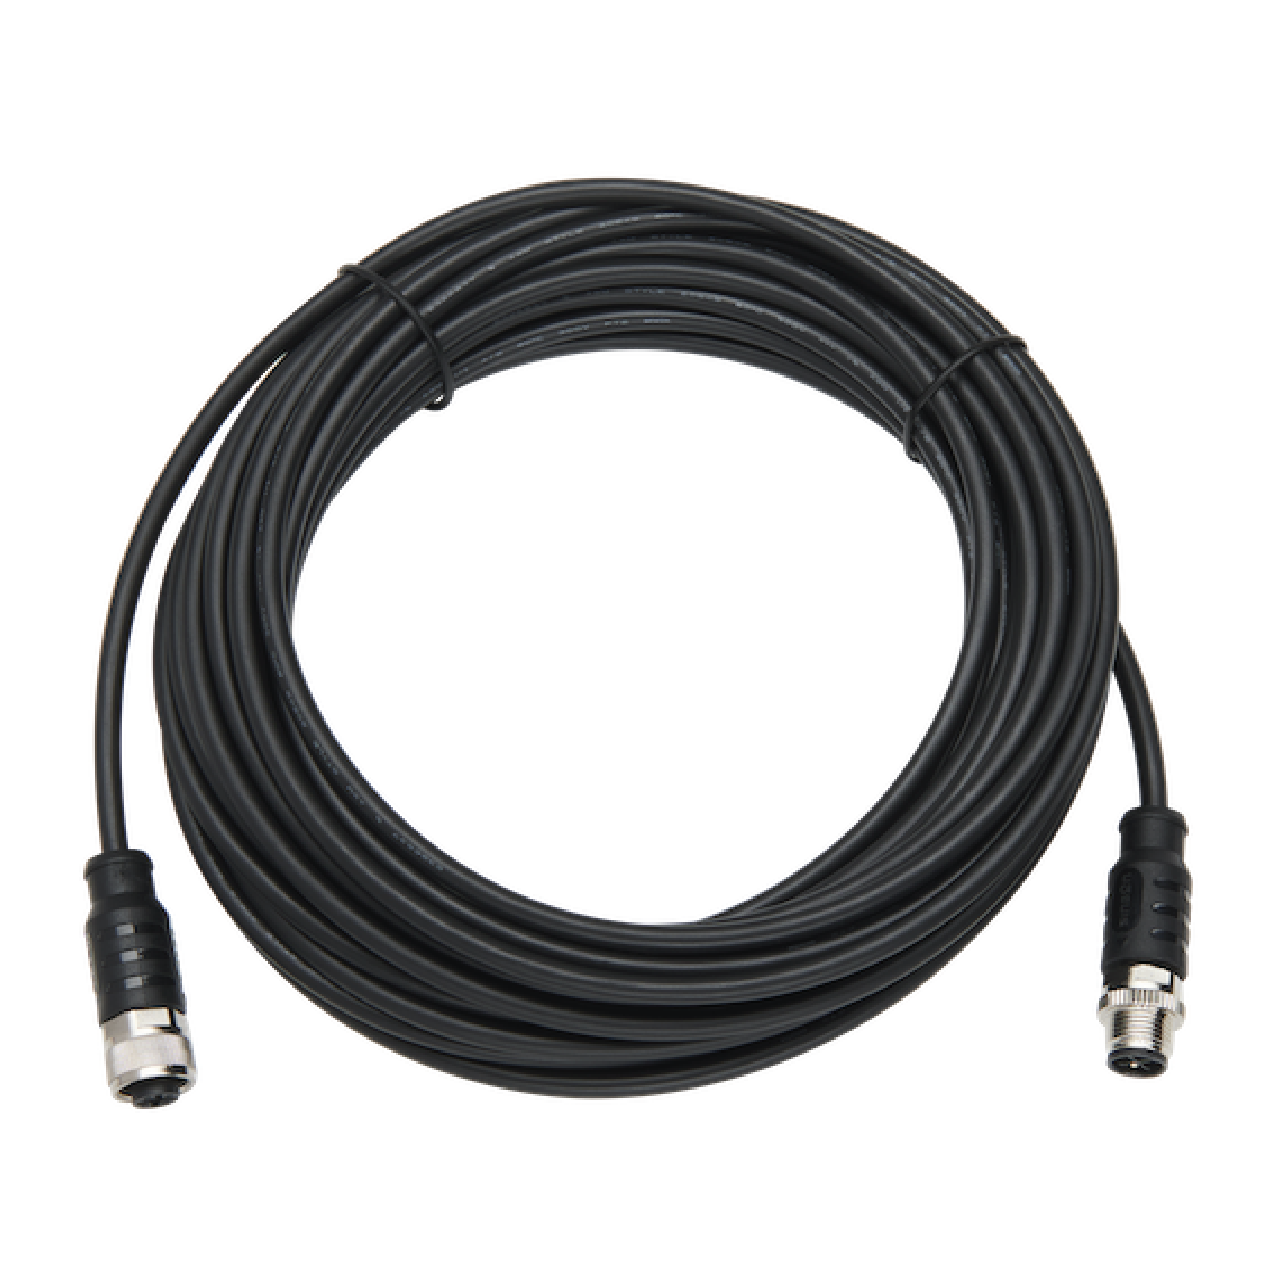 M12 to M12 DC Output Line Cord, 10 meter